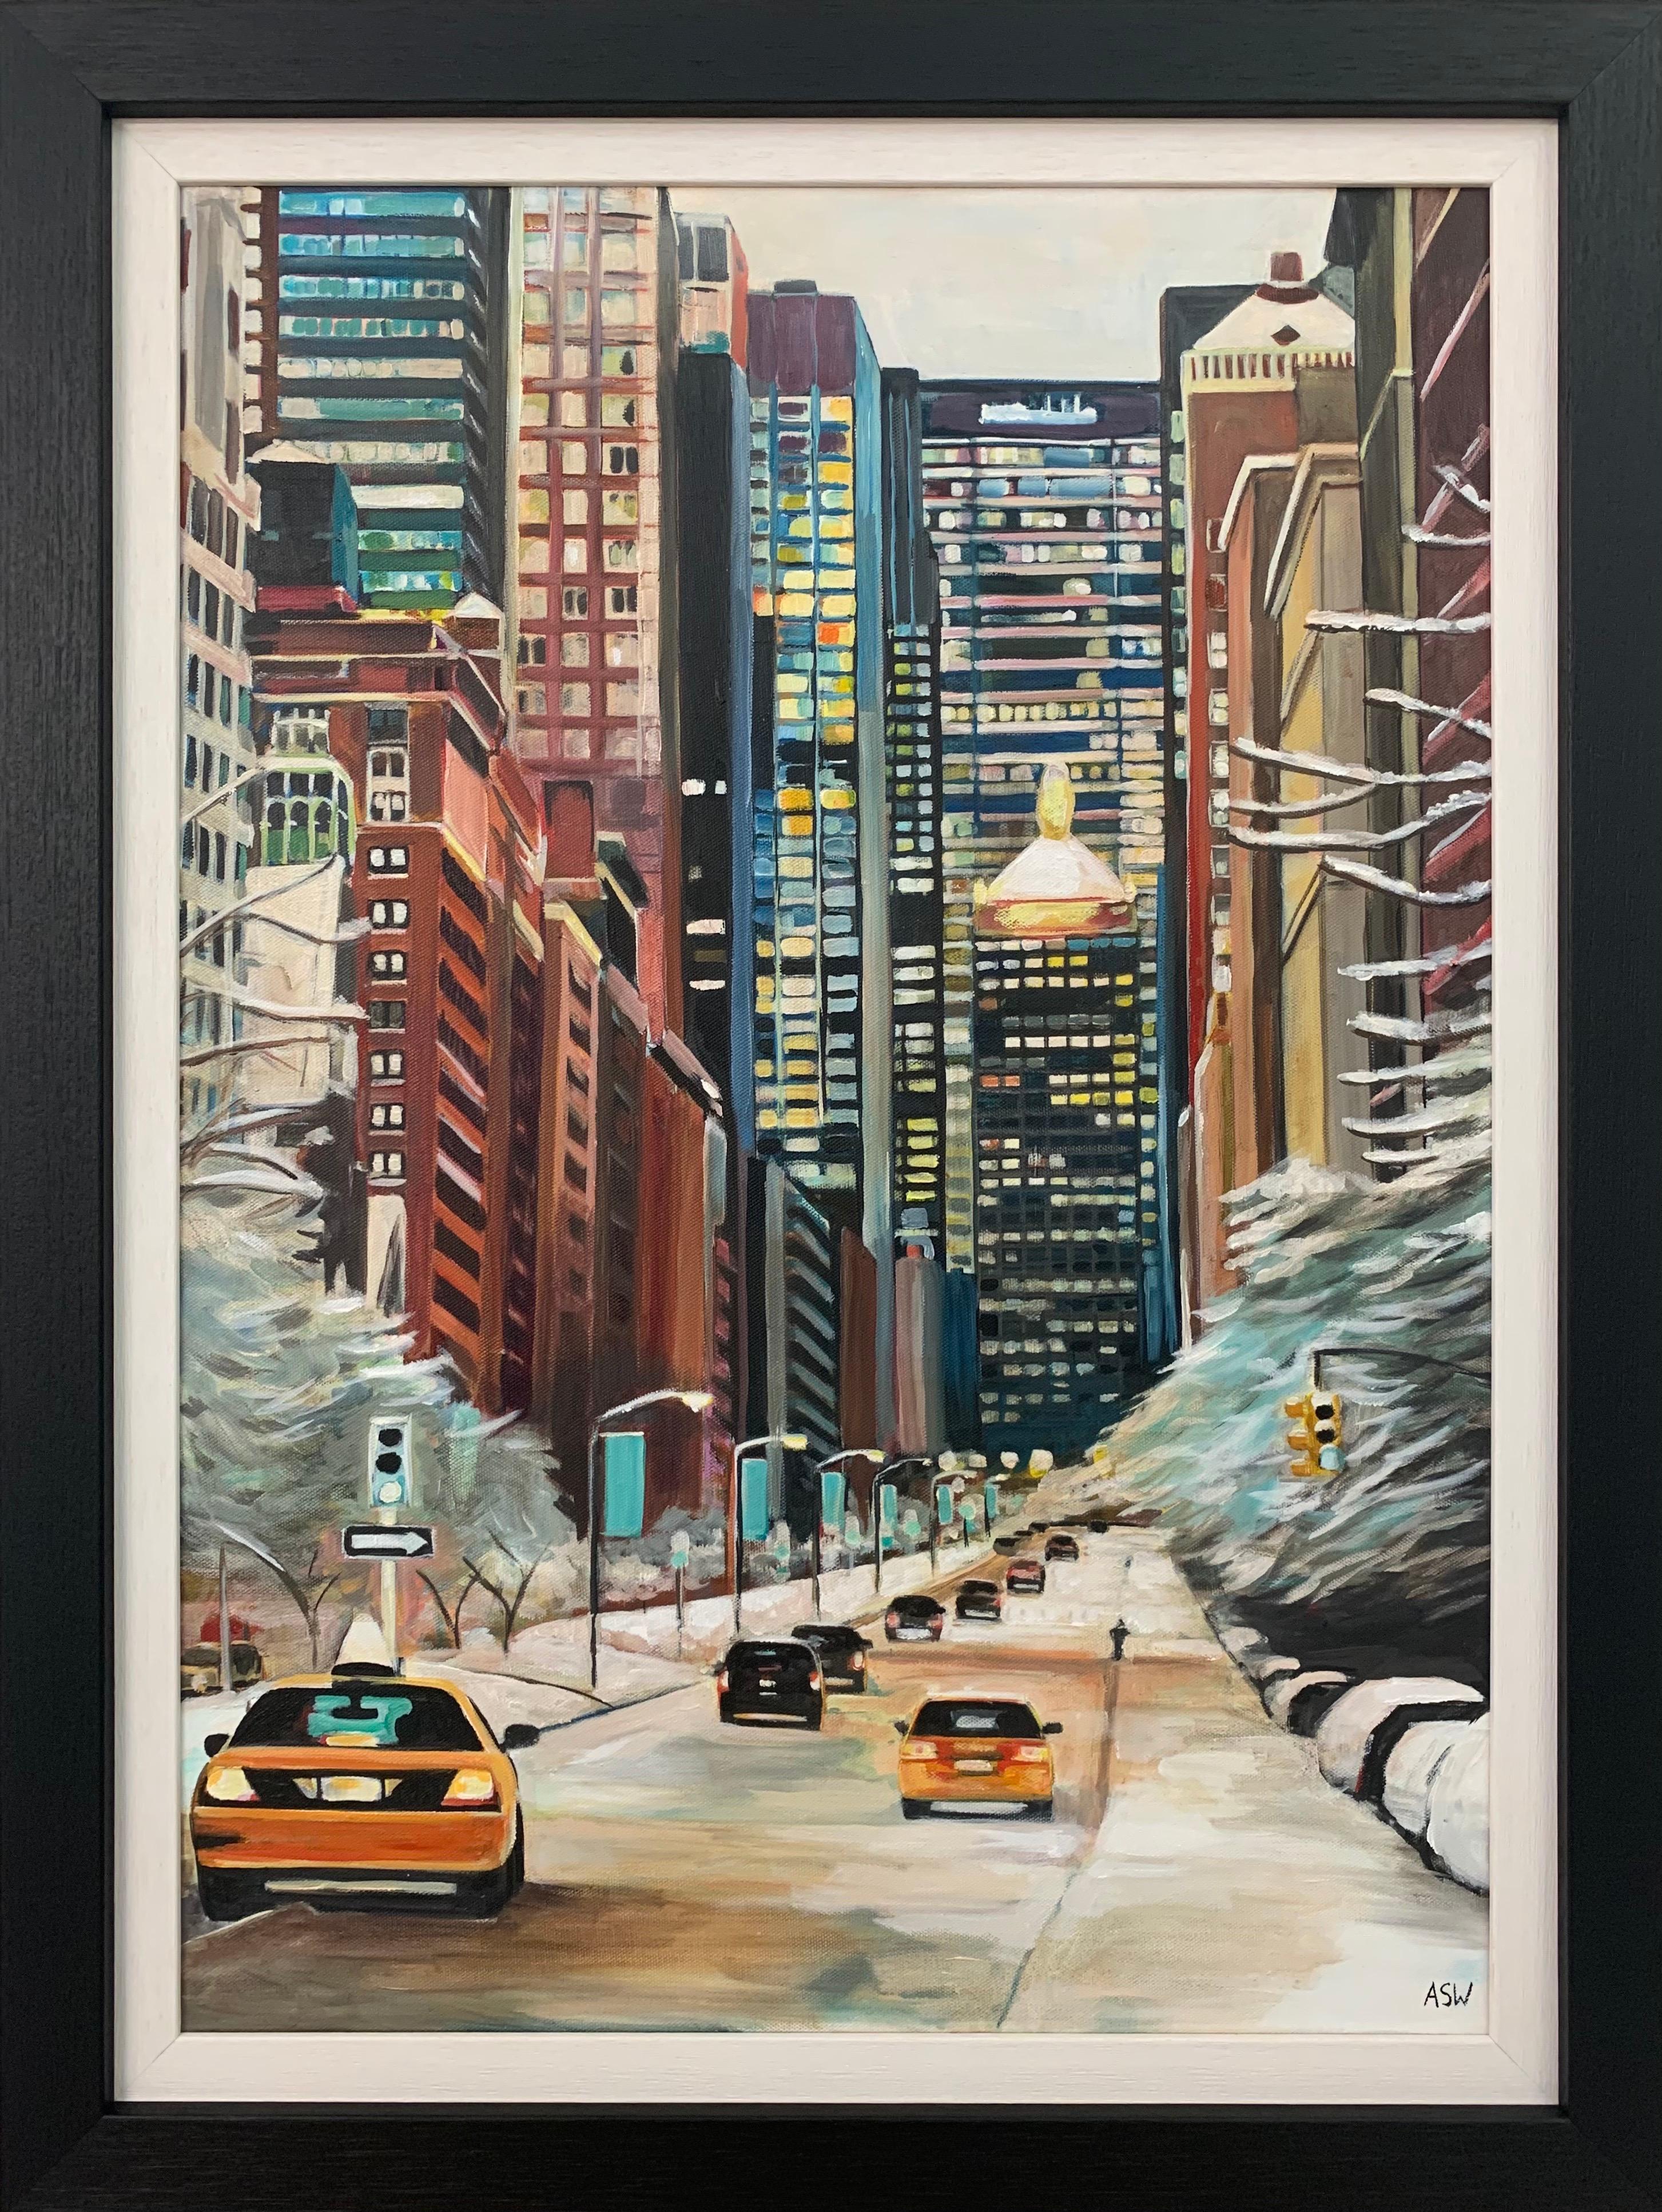 Painting of New York City Taxis in Winter Snow by Contemporary British Artist